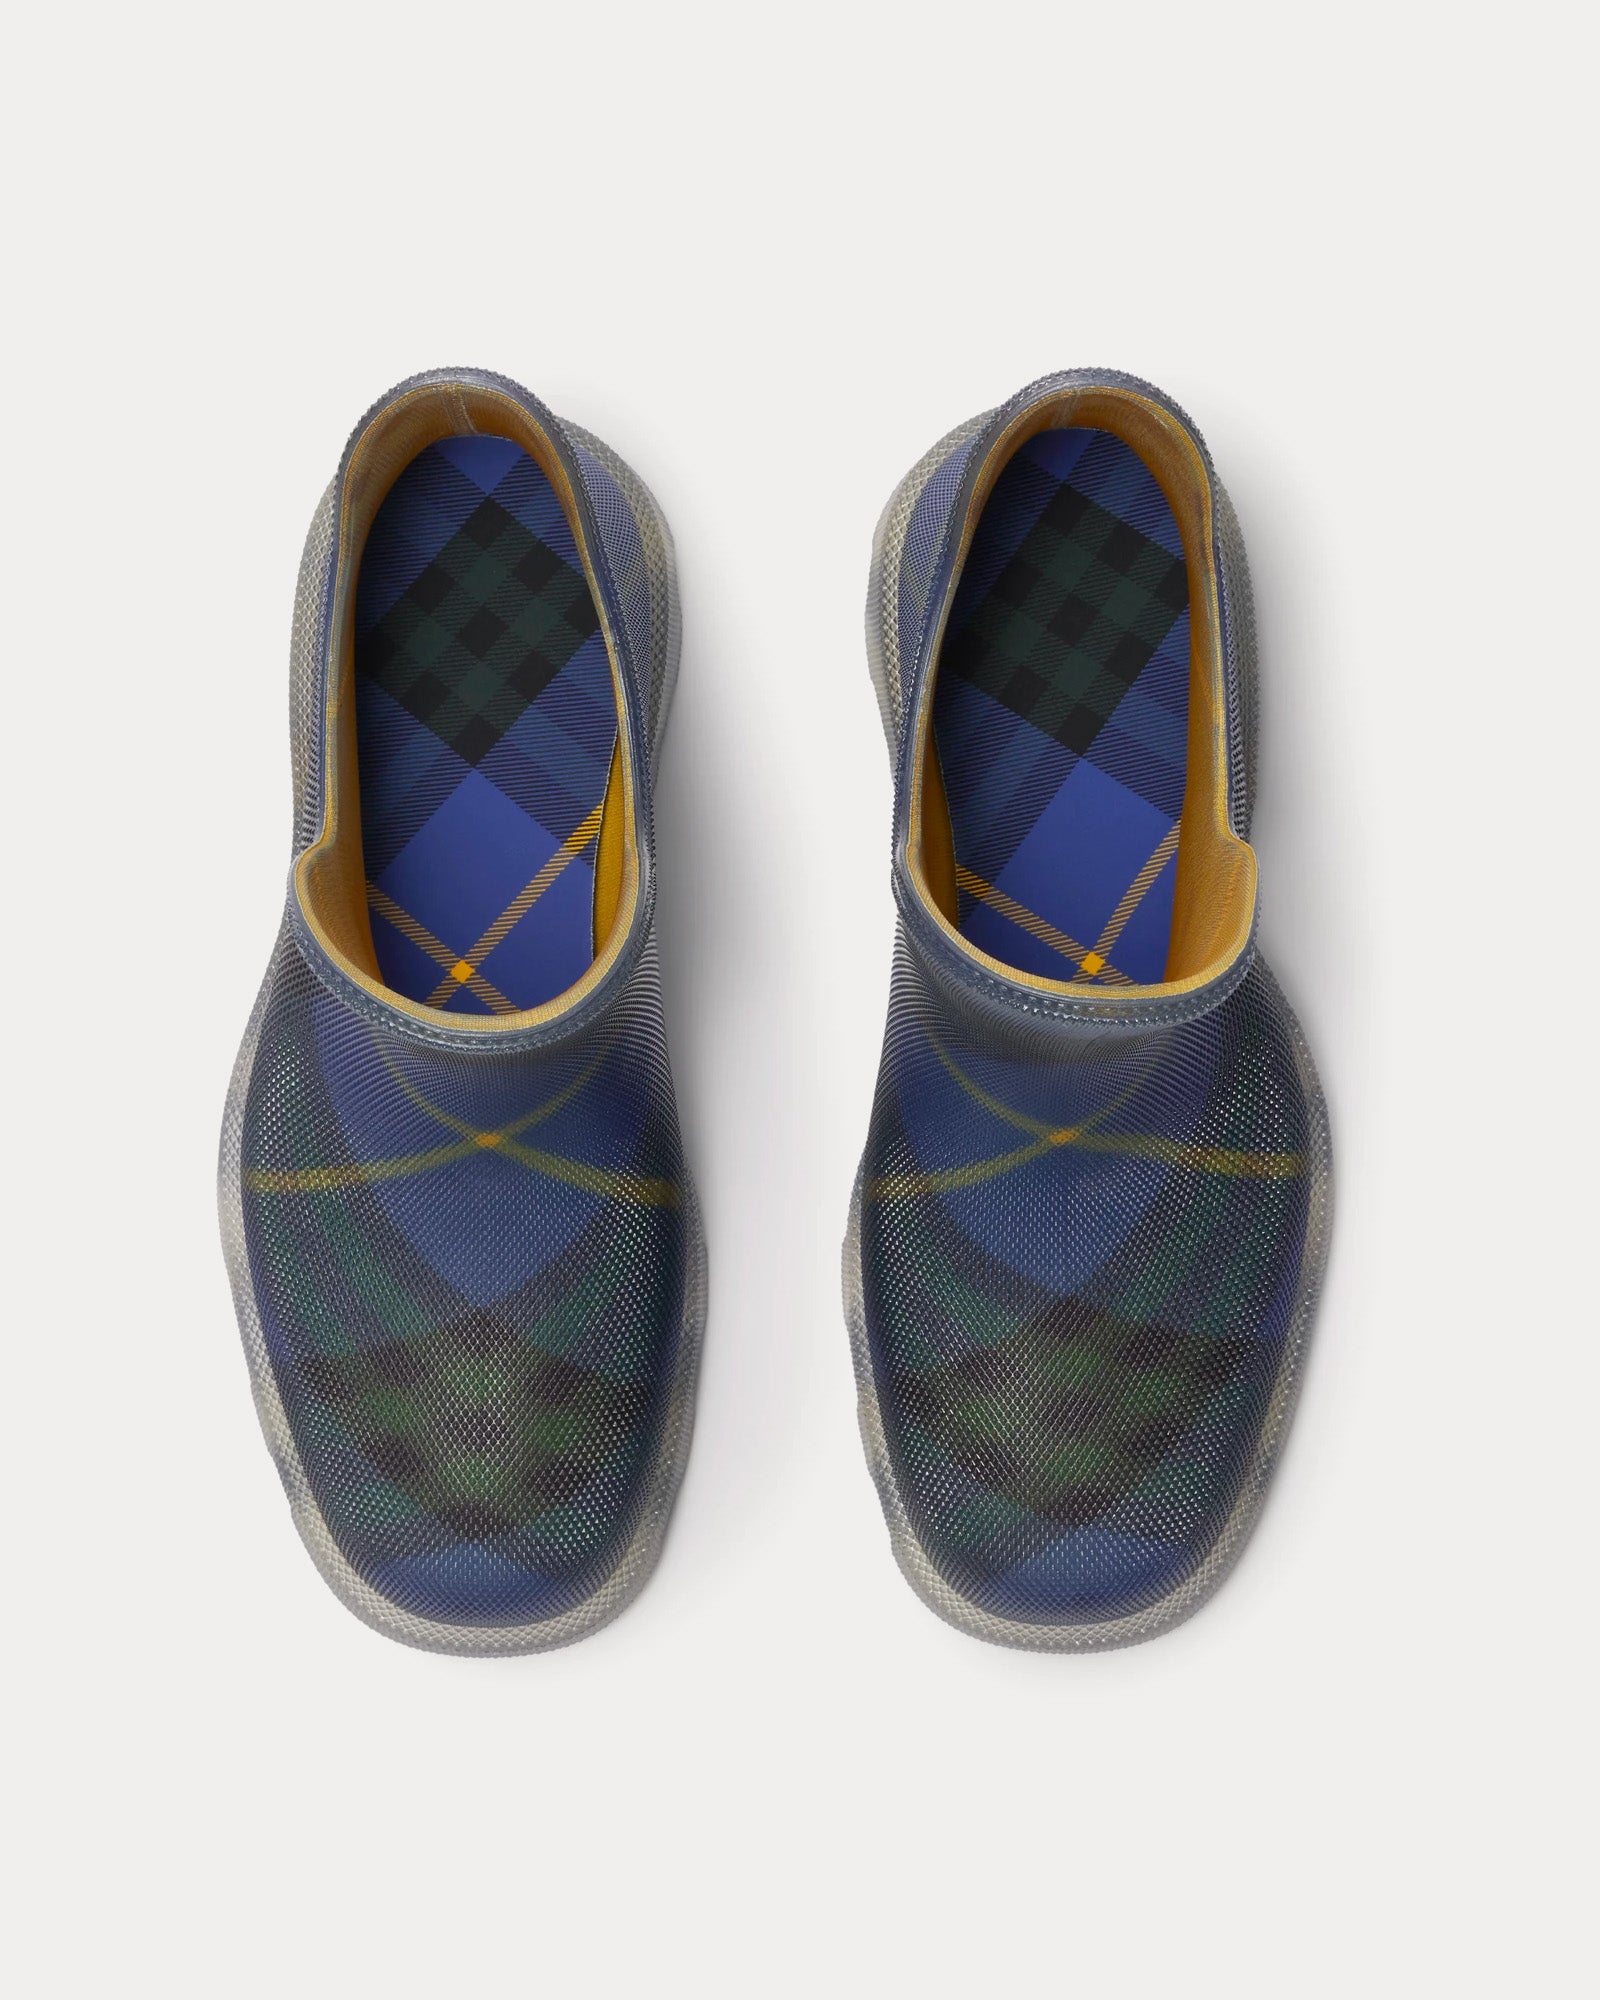 Burberry - Check Rubber Marsh Bright Navy Low Boots